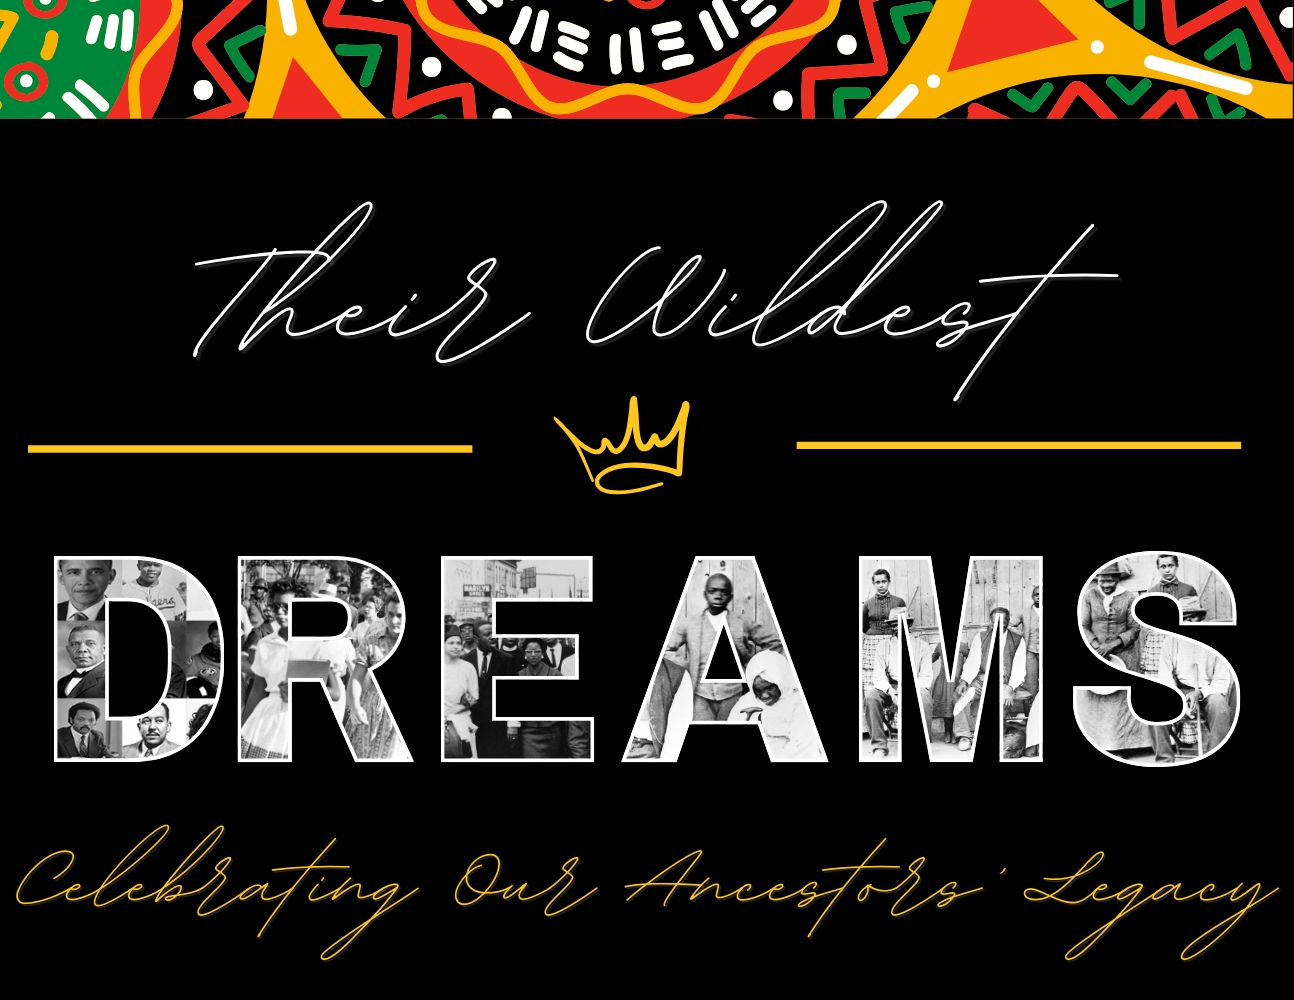 a black background framed in a red,yellow, green, and white geometric details reads “Their Wildest Dreams, Celebrating our Ancestors Legacy." 